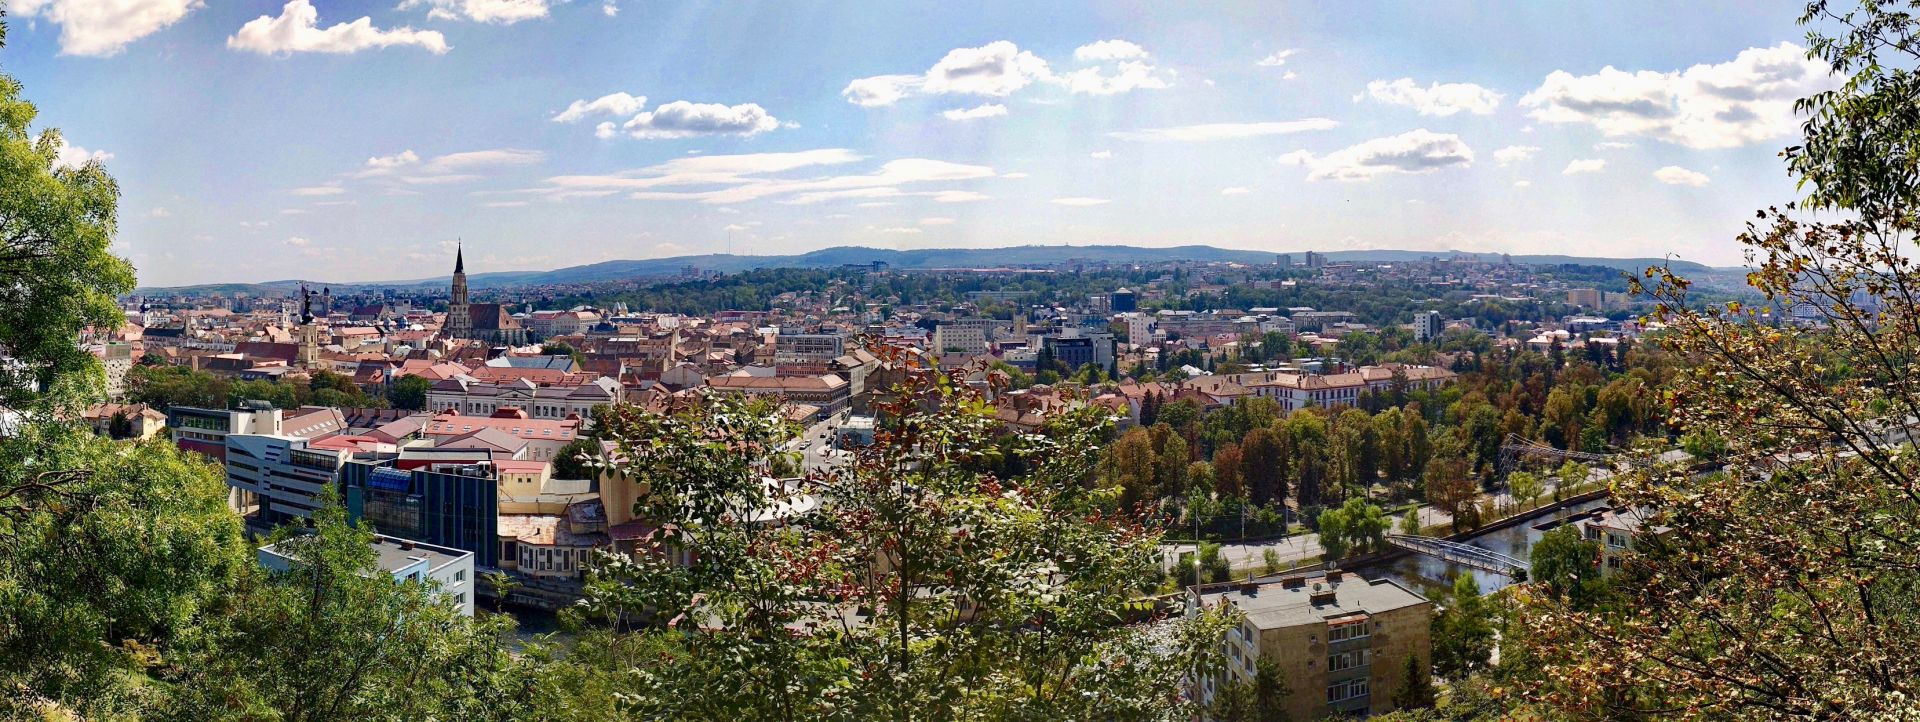 7 Things To Do in Cluj Napoca